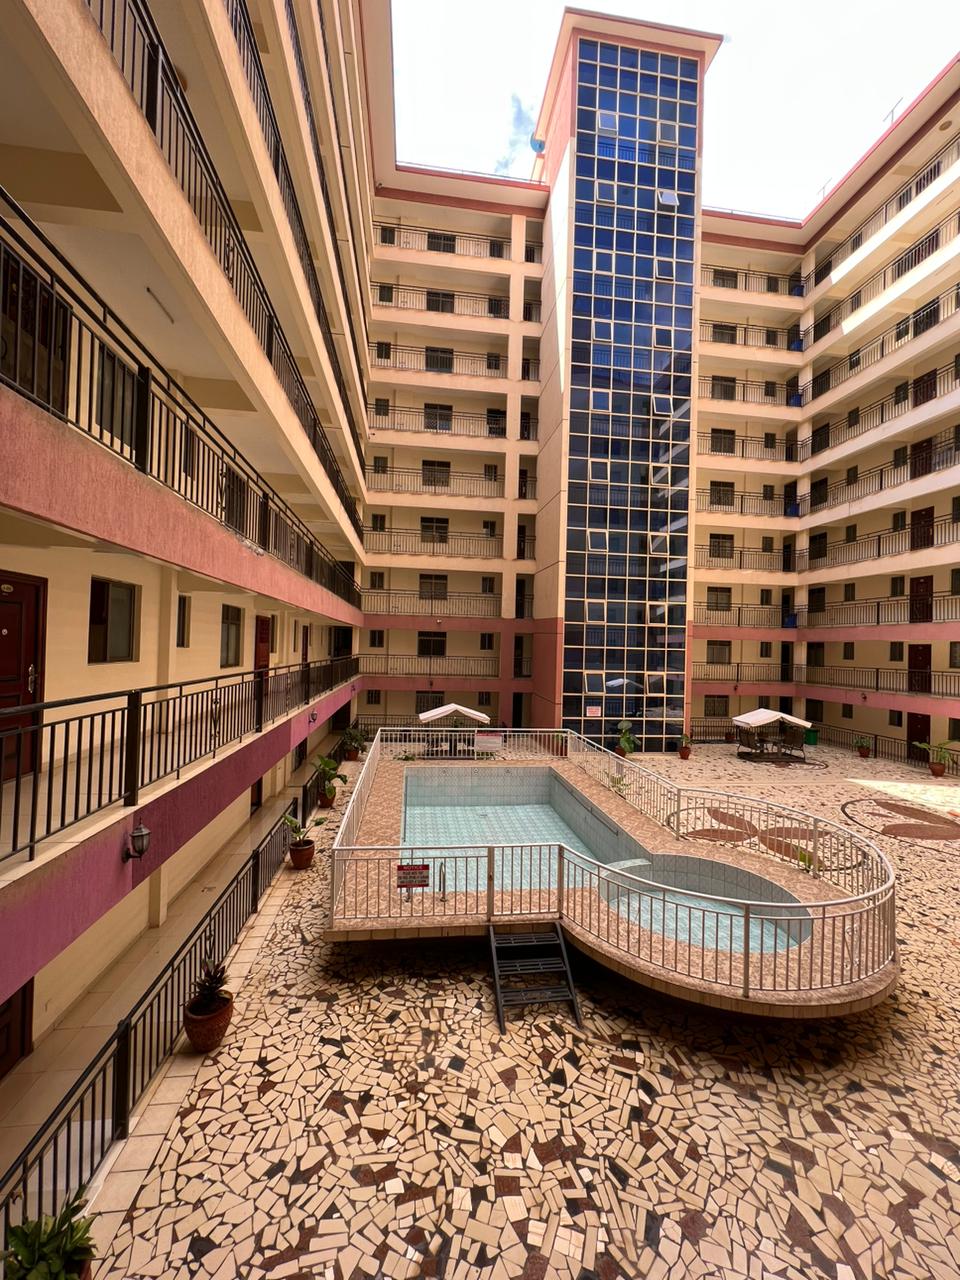 2 bedroom apartment for sale in Heart of kilimani area. Musilli Homes